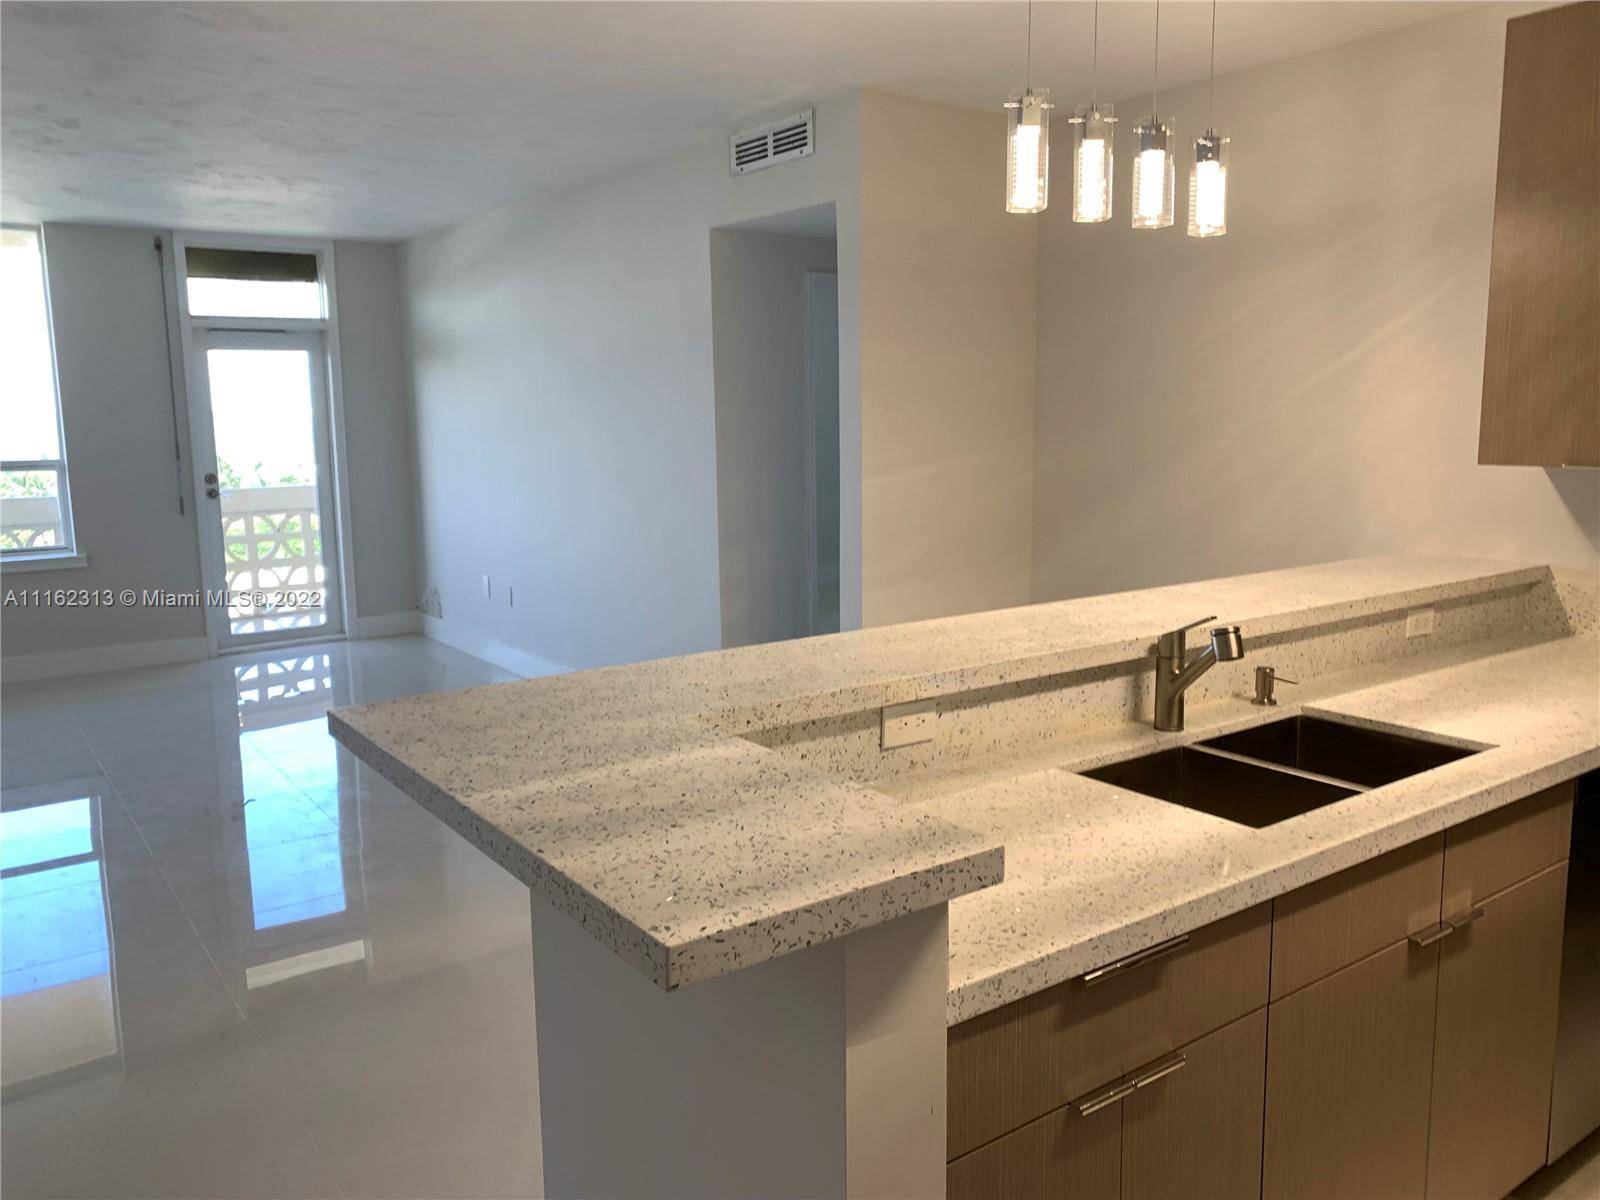 Completely renovated unit in an oceanfront building in Bal Harbor.